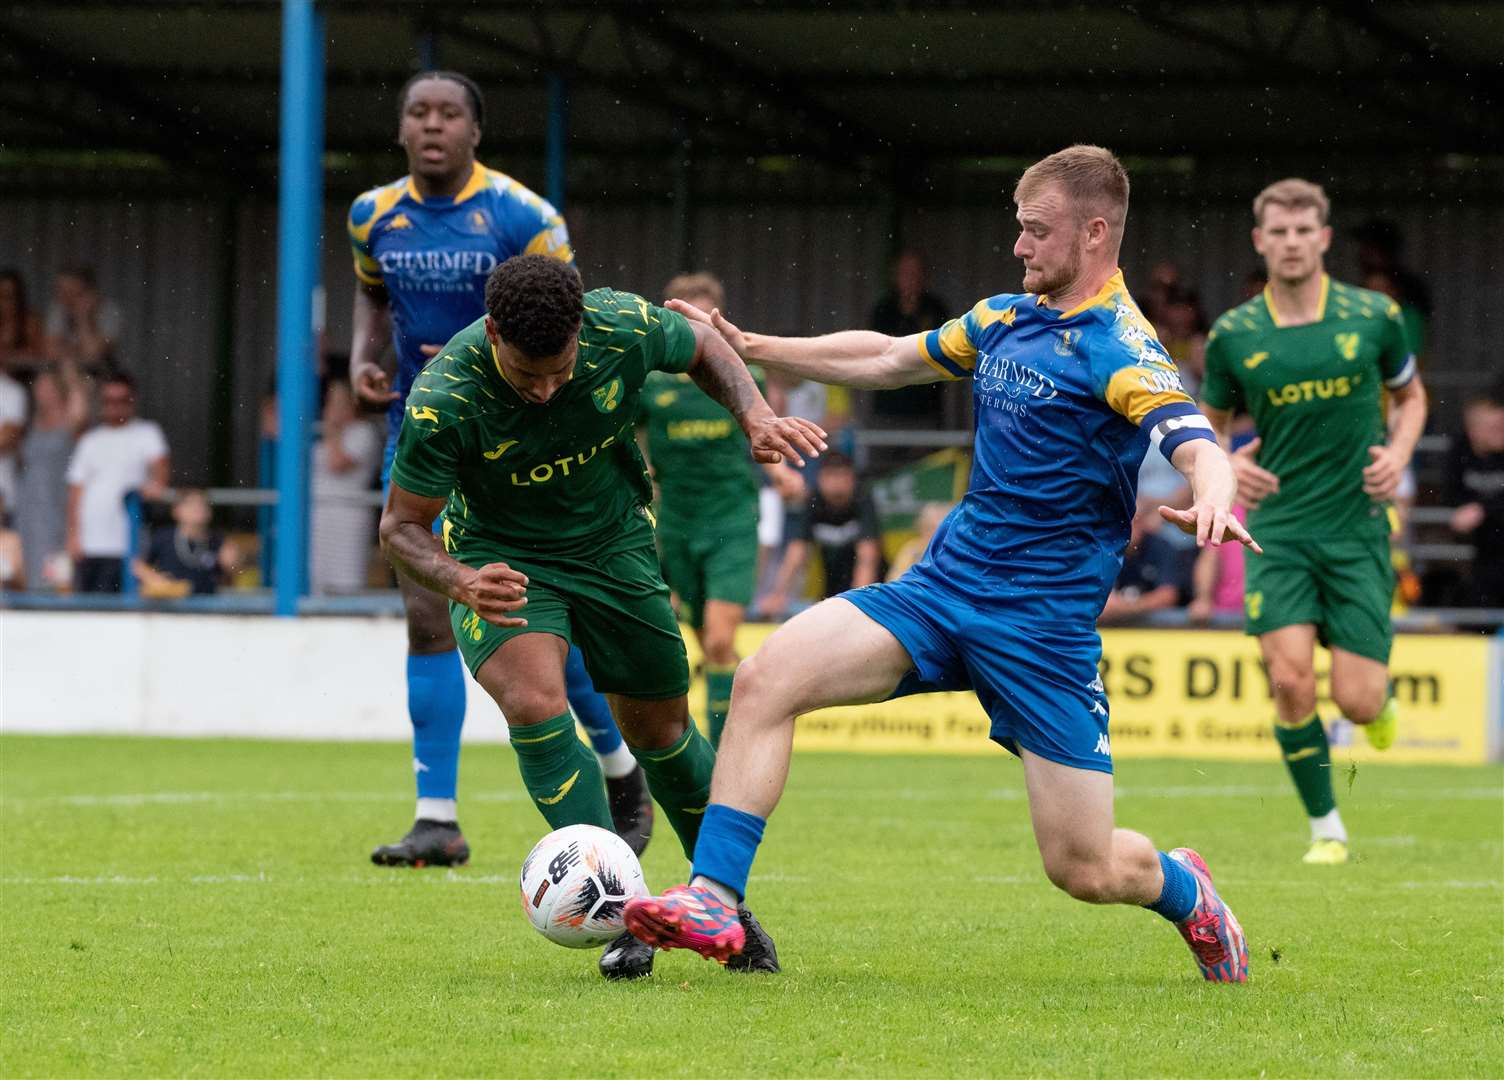 King's Lynn Town v Norwich City at The Walks on Saturday.